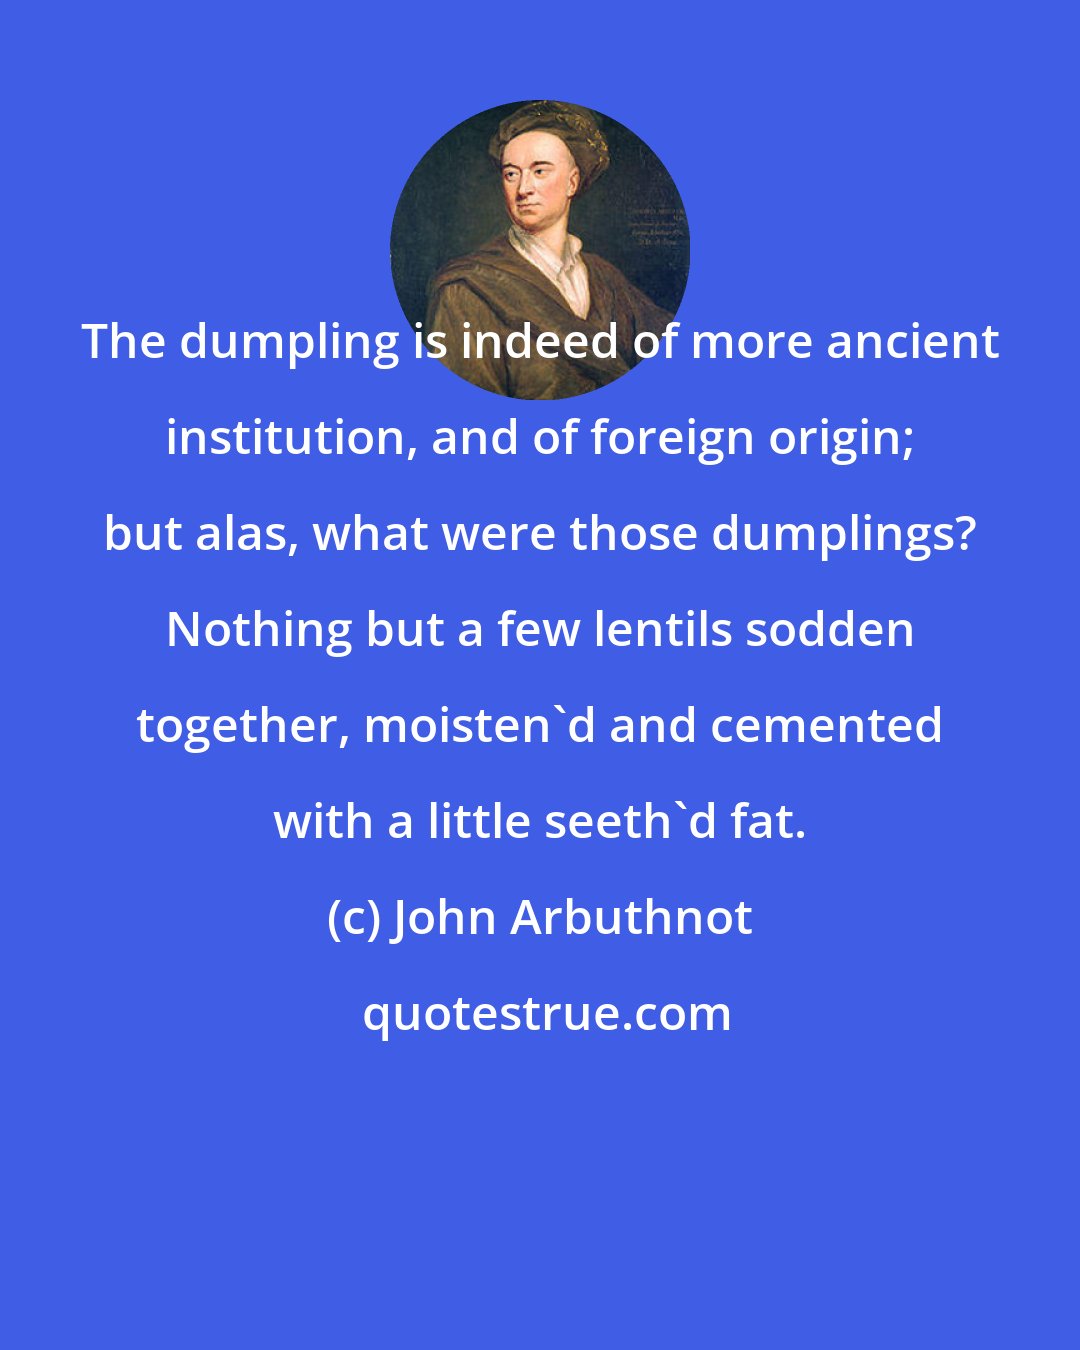 John Arbuthnot: The dumpling is indeed of more ancient institution, and of foreign origin; but alas, what were those dumplings? Nothing but a few lentils sodden together, moisten'd and cemented with a little seeth'd fat.